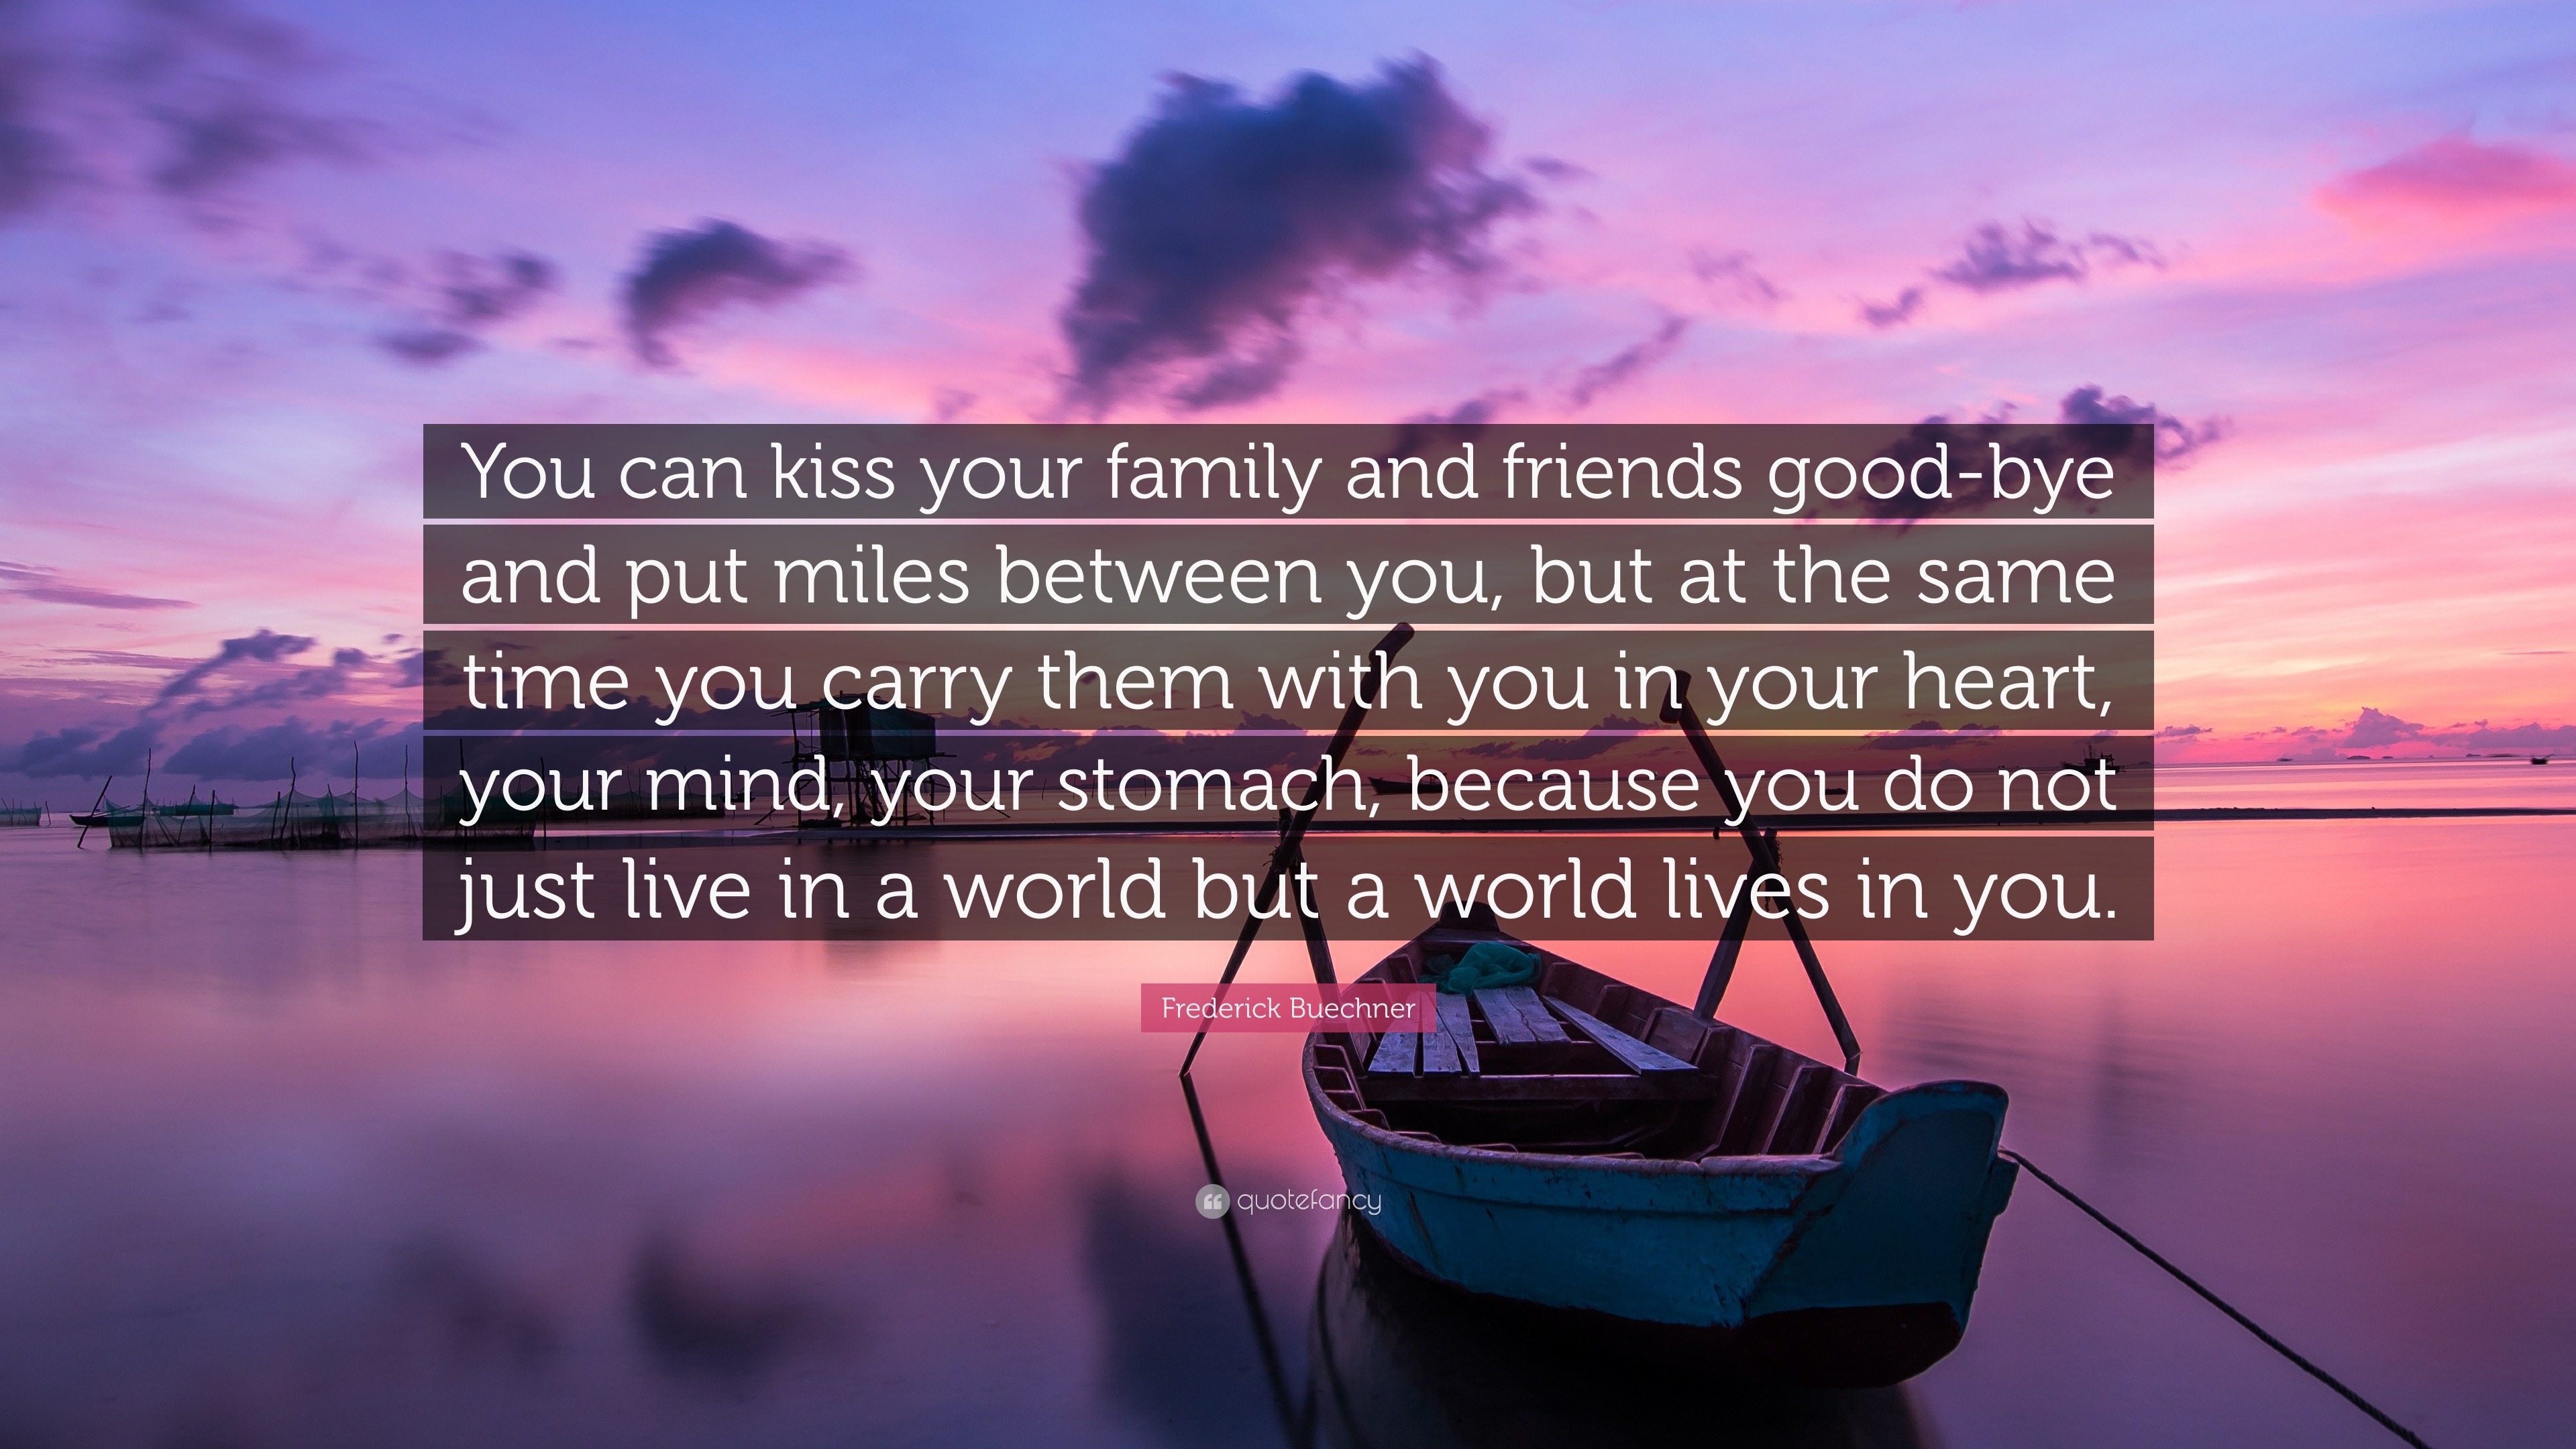 Frederick Buechner Quote “You can kiss your family and friends good bye and